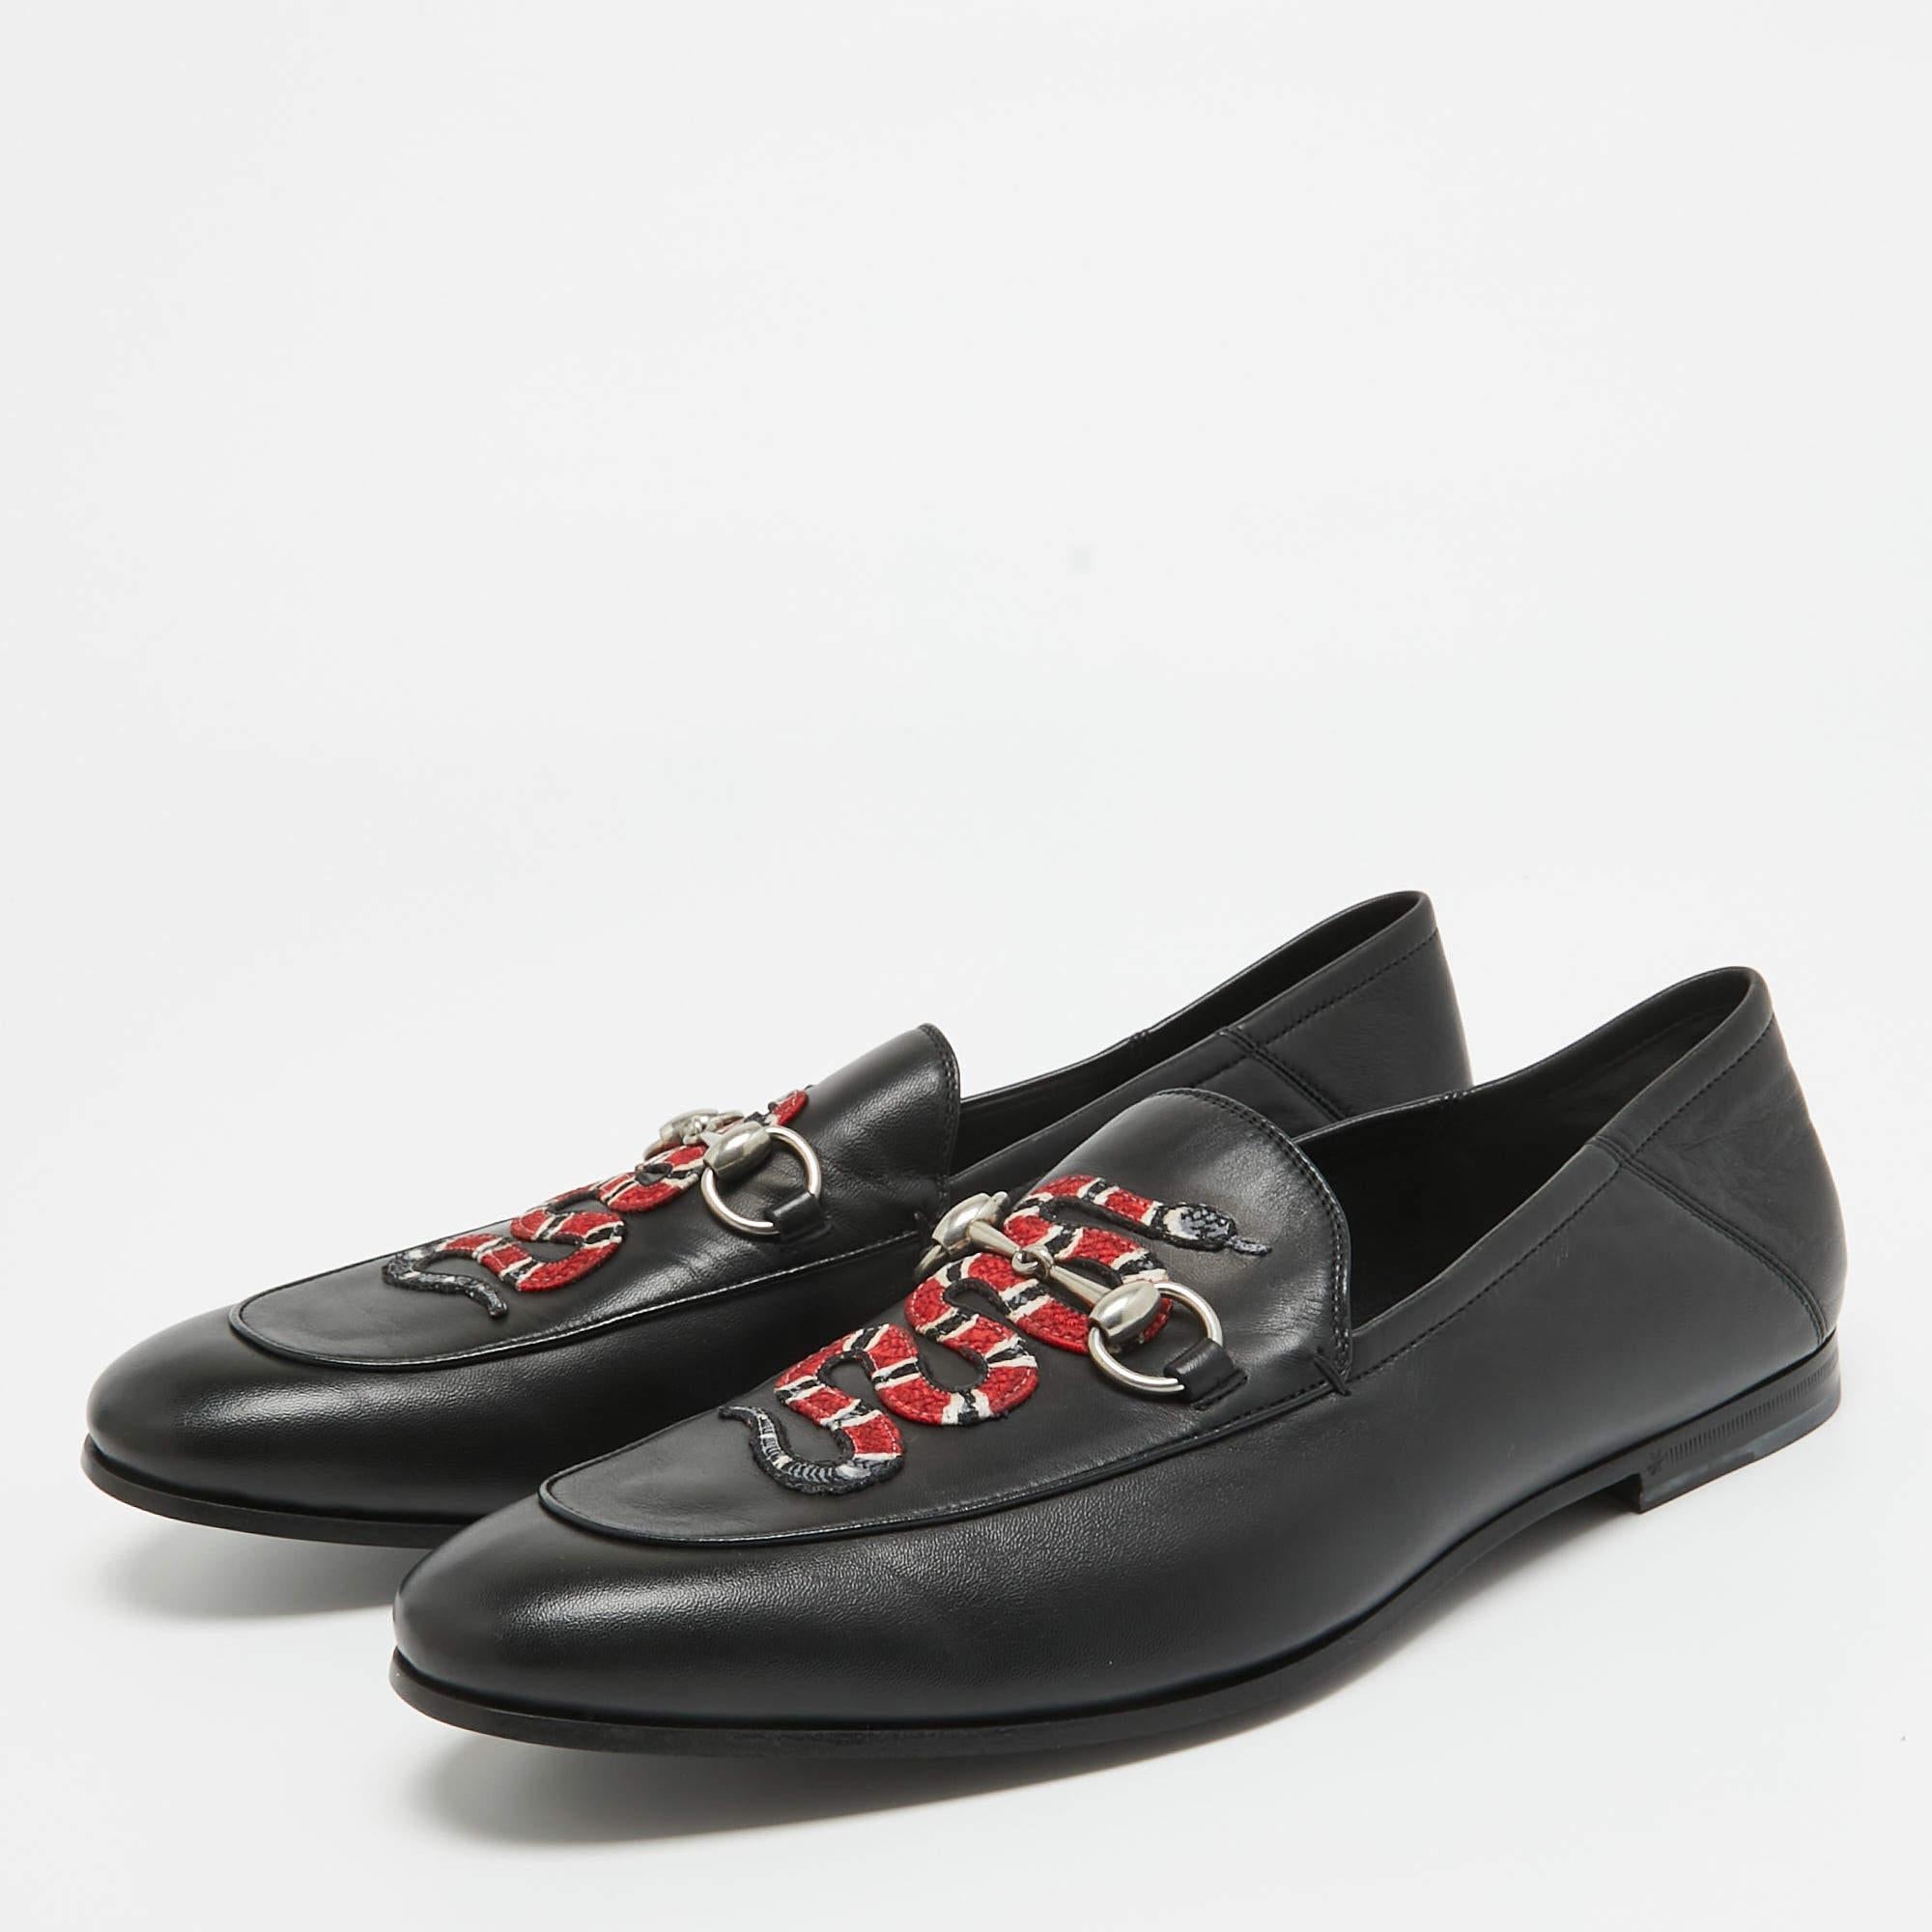 Gucci Black Leather Embroidered Kingsnake Brixton Horsebit Loafers Size 44.5 2